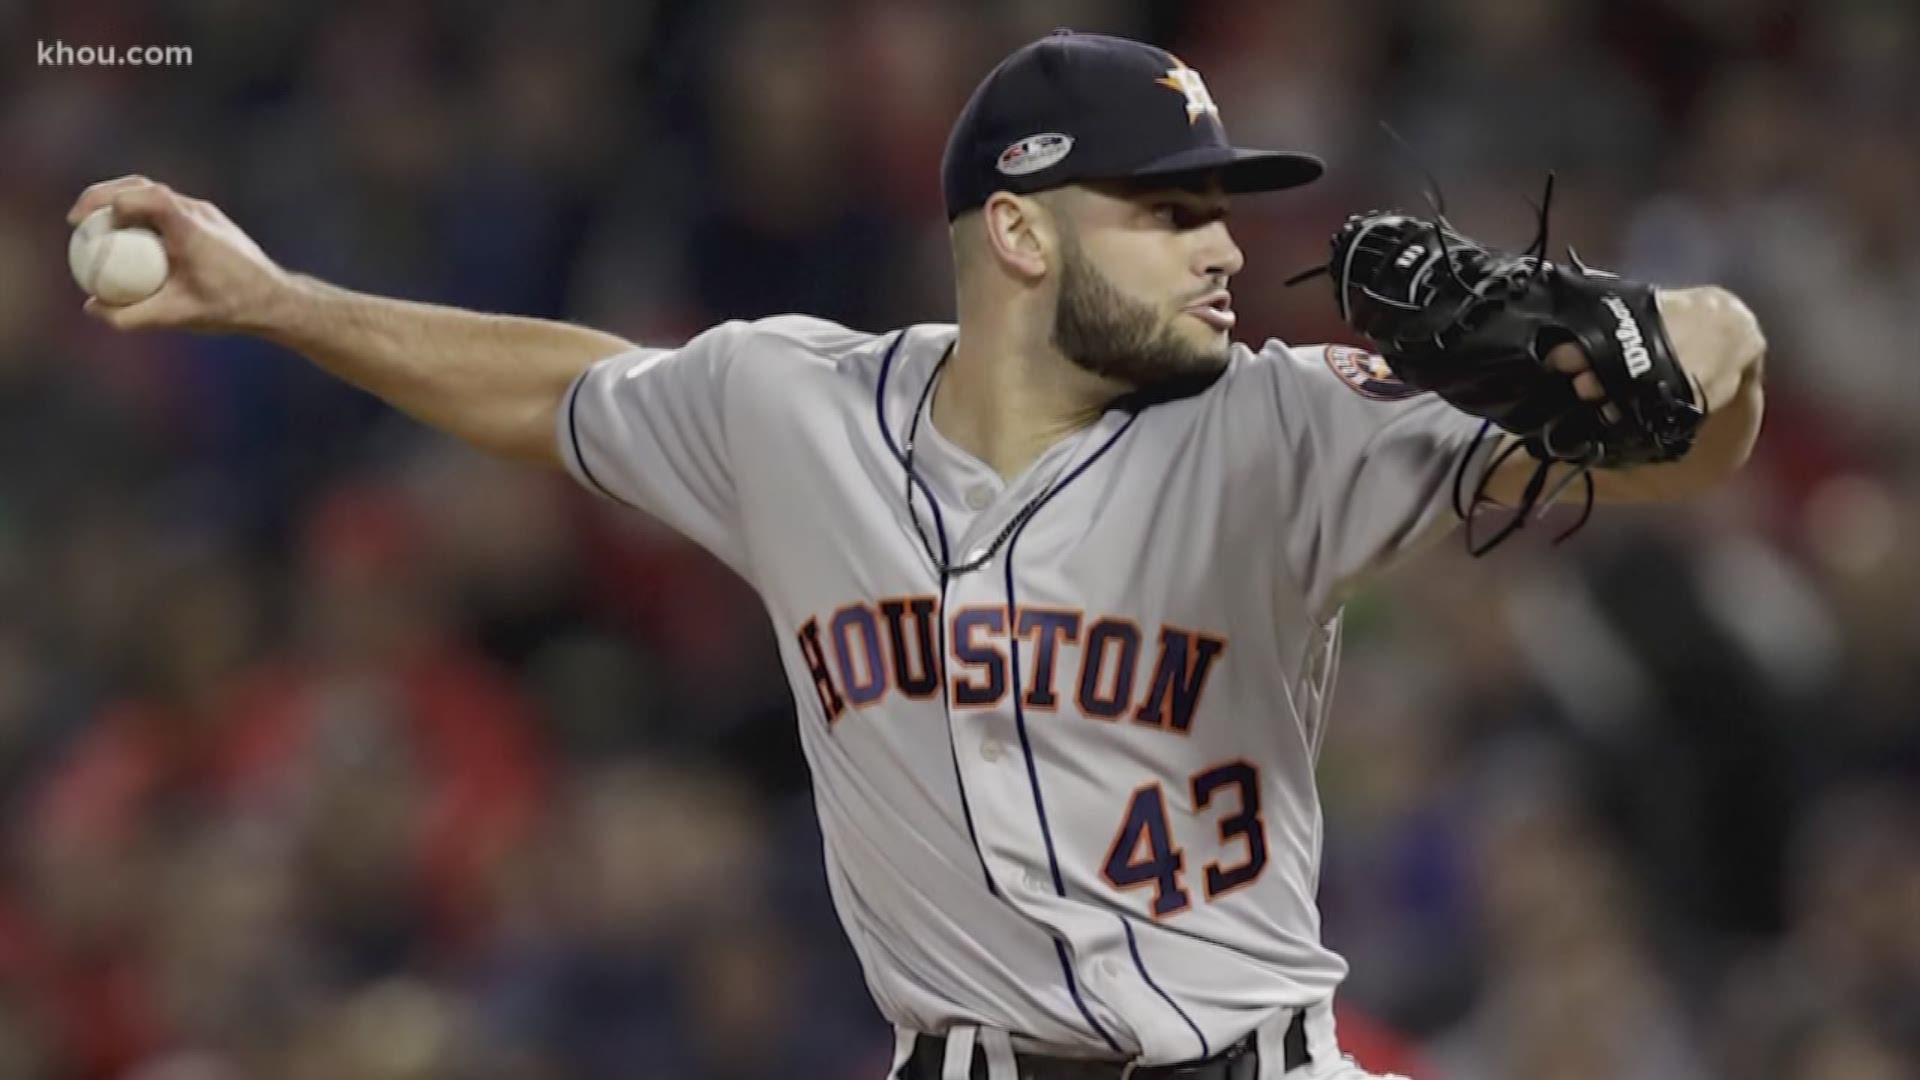 Astros pitcher offering chance to win World Series tickets